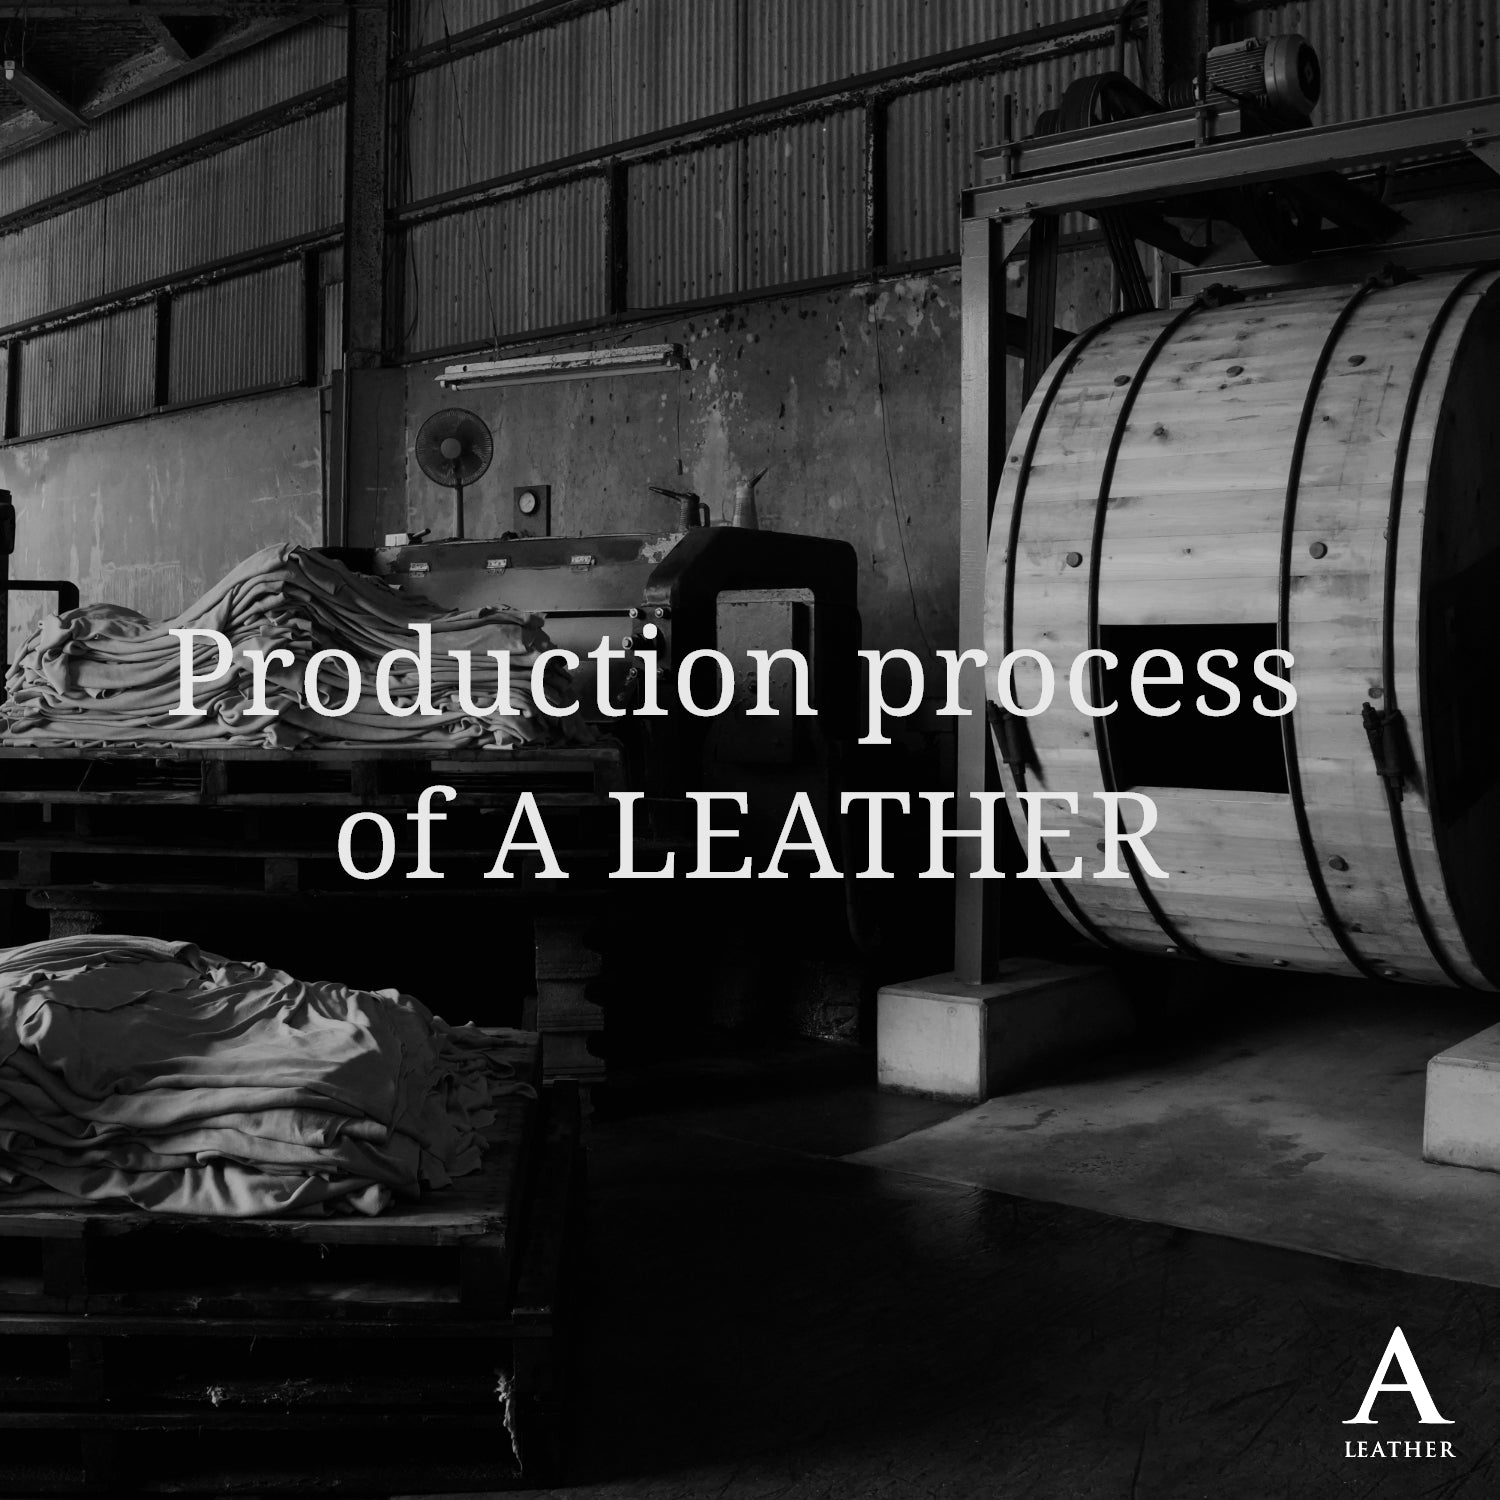 Production process of A LEATHER